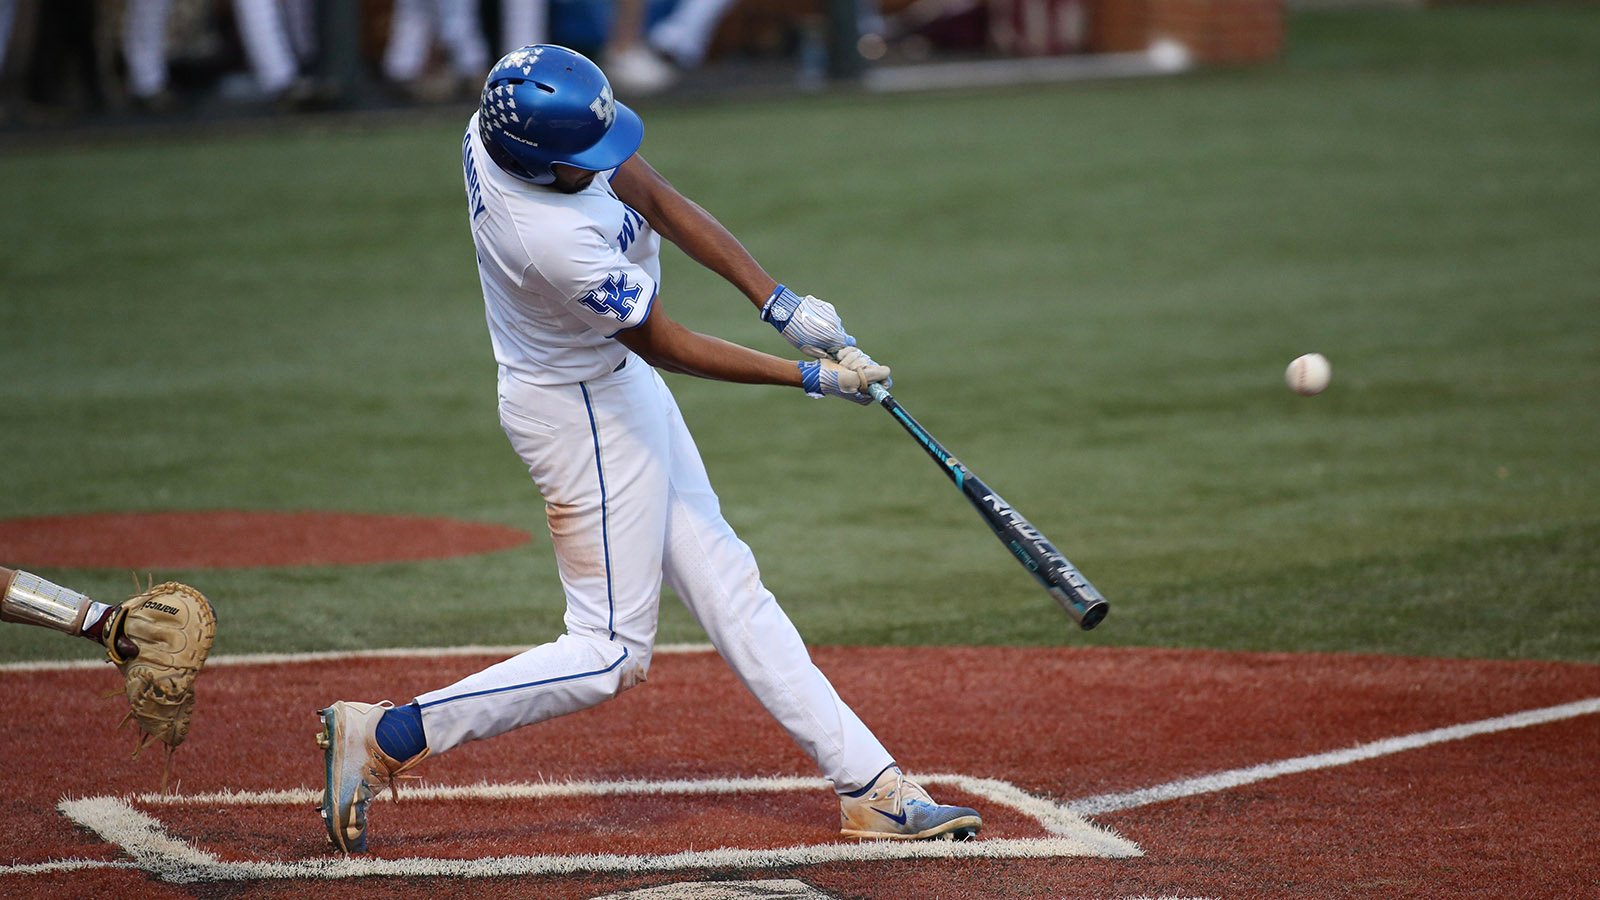 No. 17 Kentucky Opens Final Weekend at The Cliff With Win